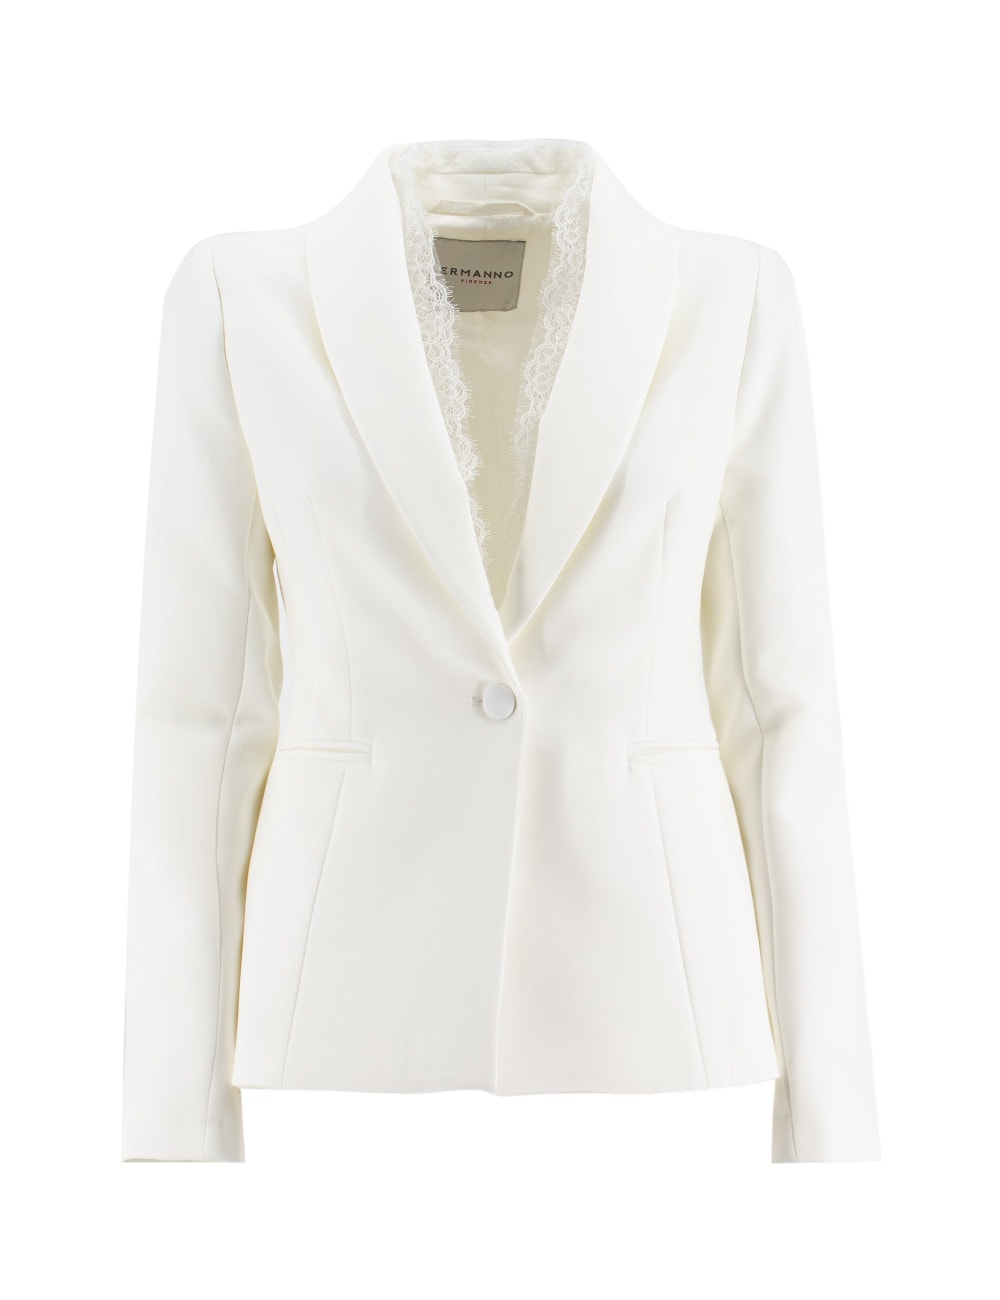 Ermanno Firenze Jacket In Off White/off White